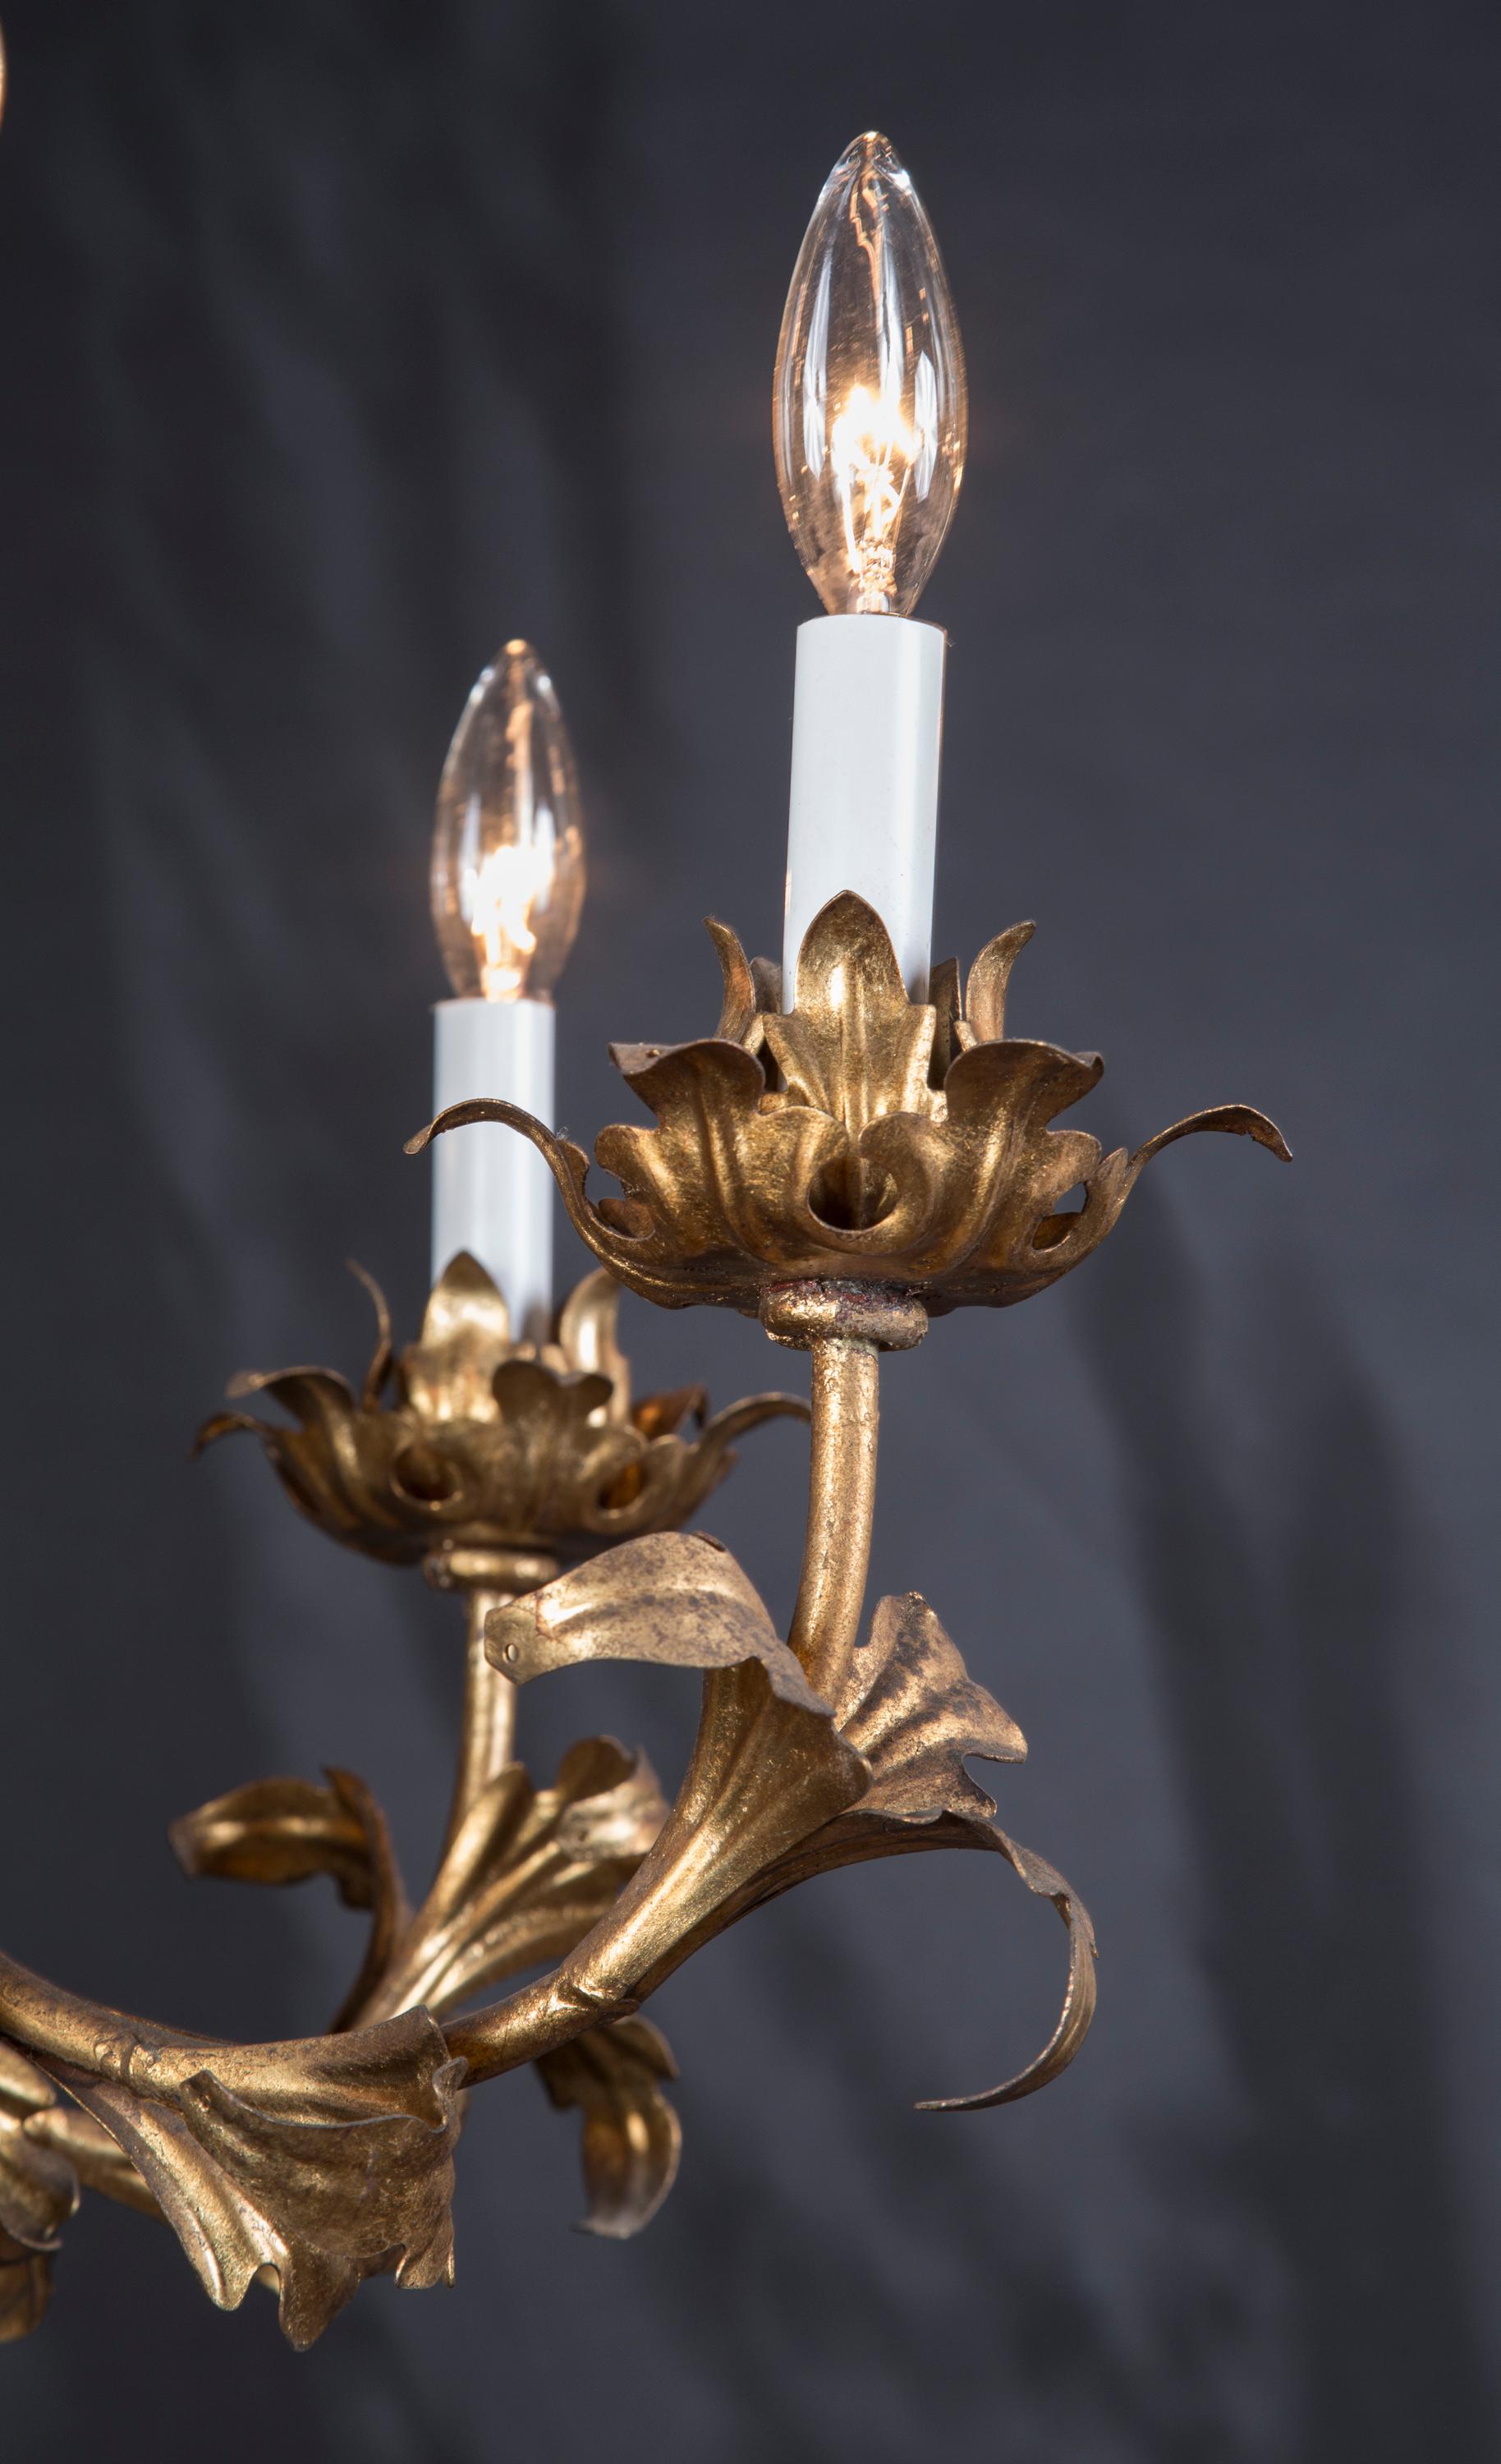 This beautiful Louis XV chandelier is made of gilded tole, gold plating on tin, and joins our collection from Italy. The piece dates back to the mid 20th Century, circa 1950, and offers a unique shape with a foliate motif throughout. Floral bobeches